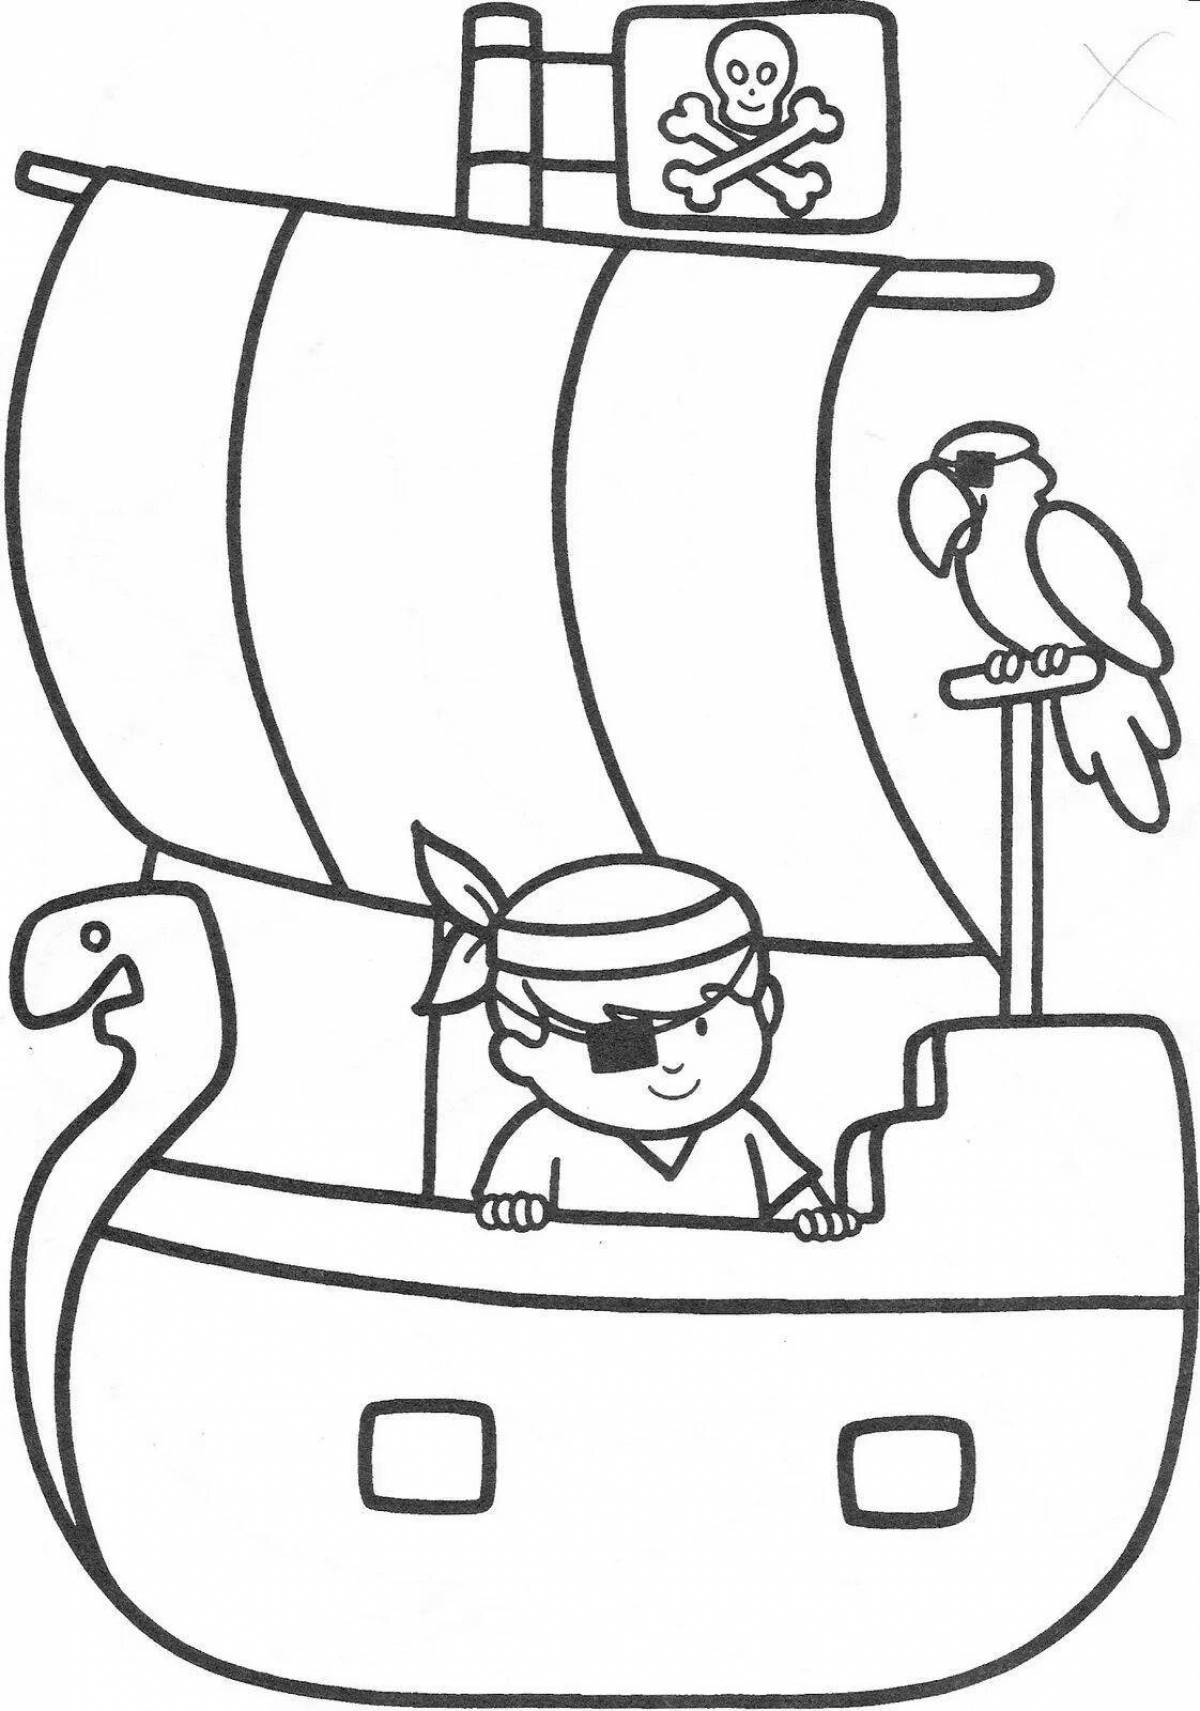 Coloring big pirate ship for kids